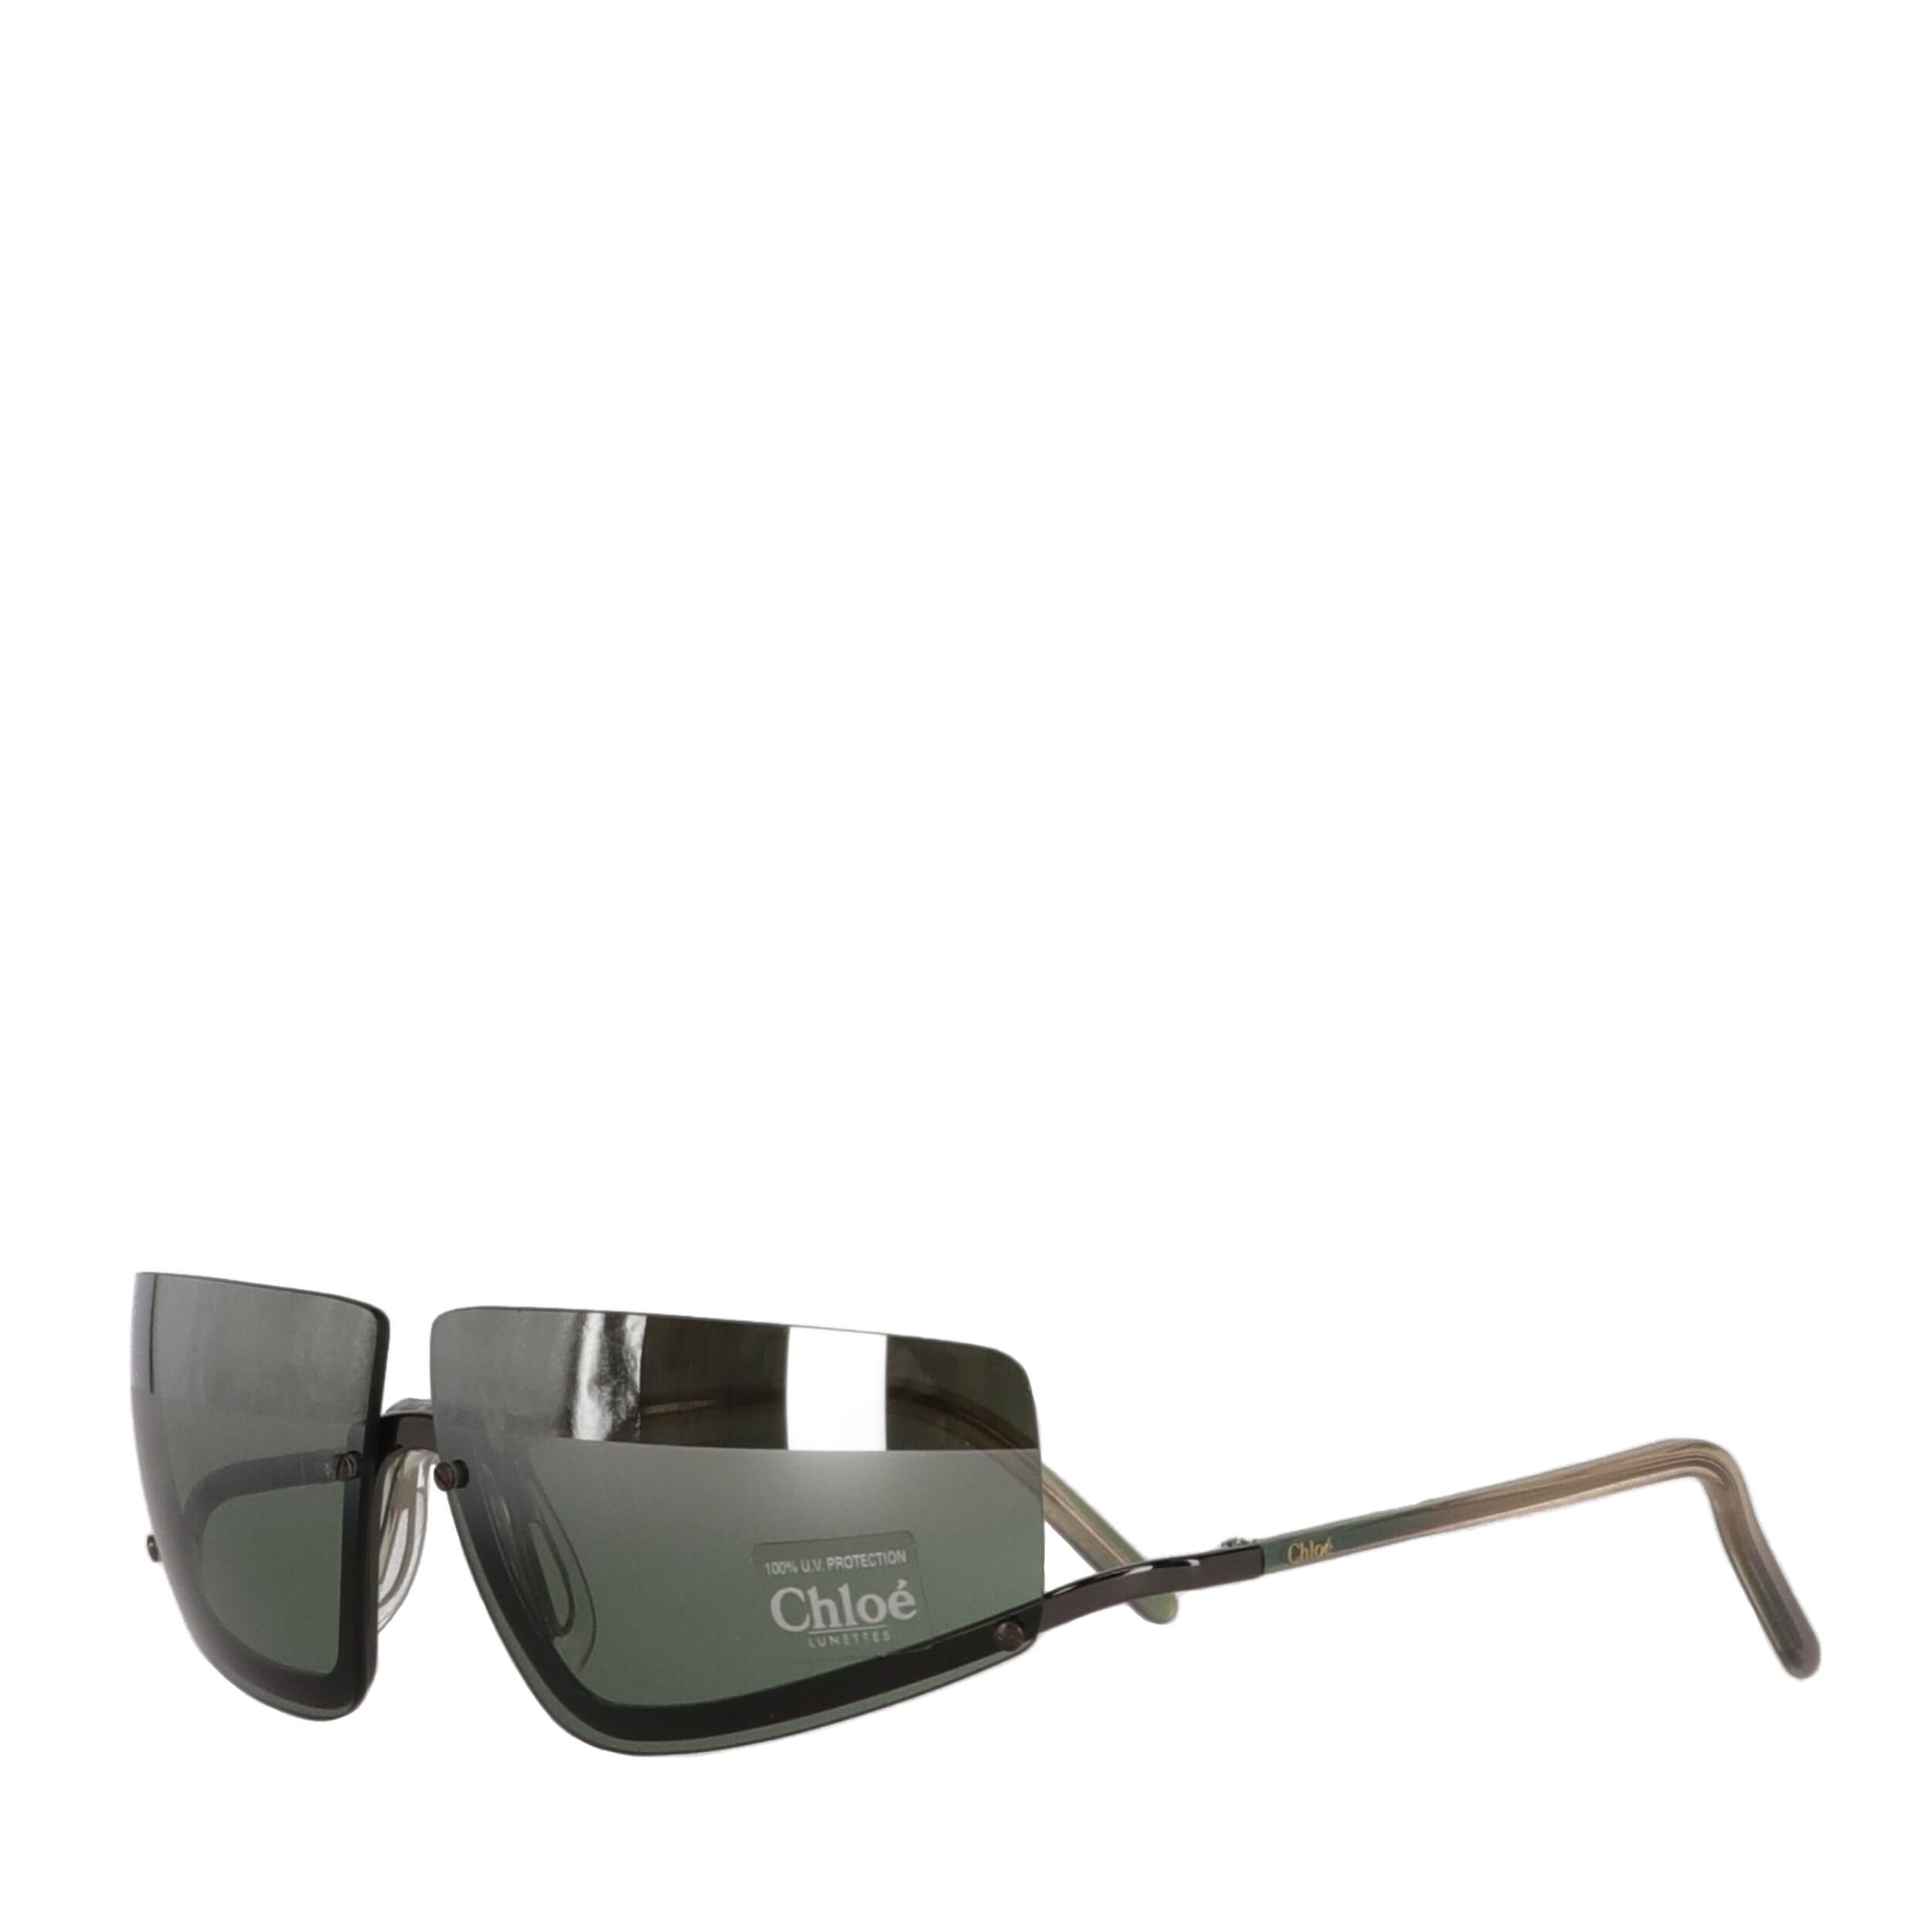 Chloé metal frame sunglasses with mirrored green lenses.
Please note, this item cannot be shipped to the US.

Years: 2000s
Made in Italy

Width: 14 cm
Height: 4,5 cm